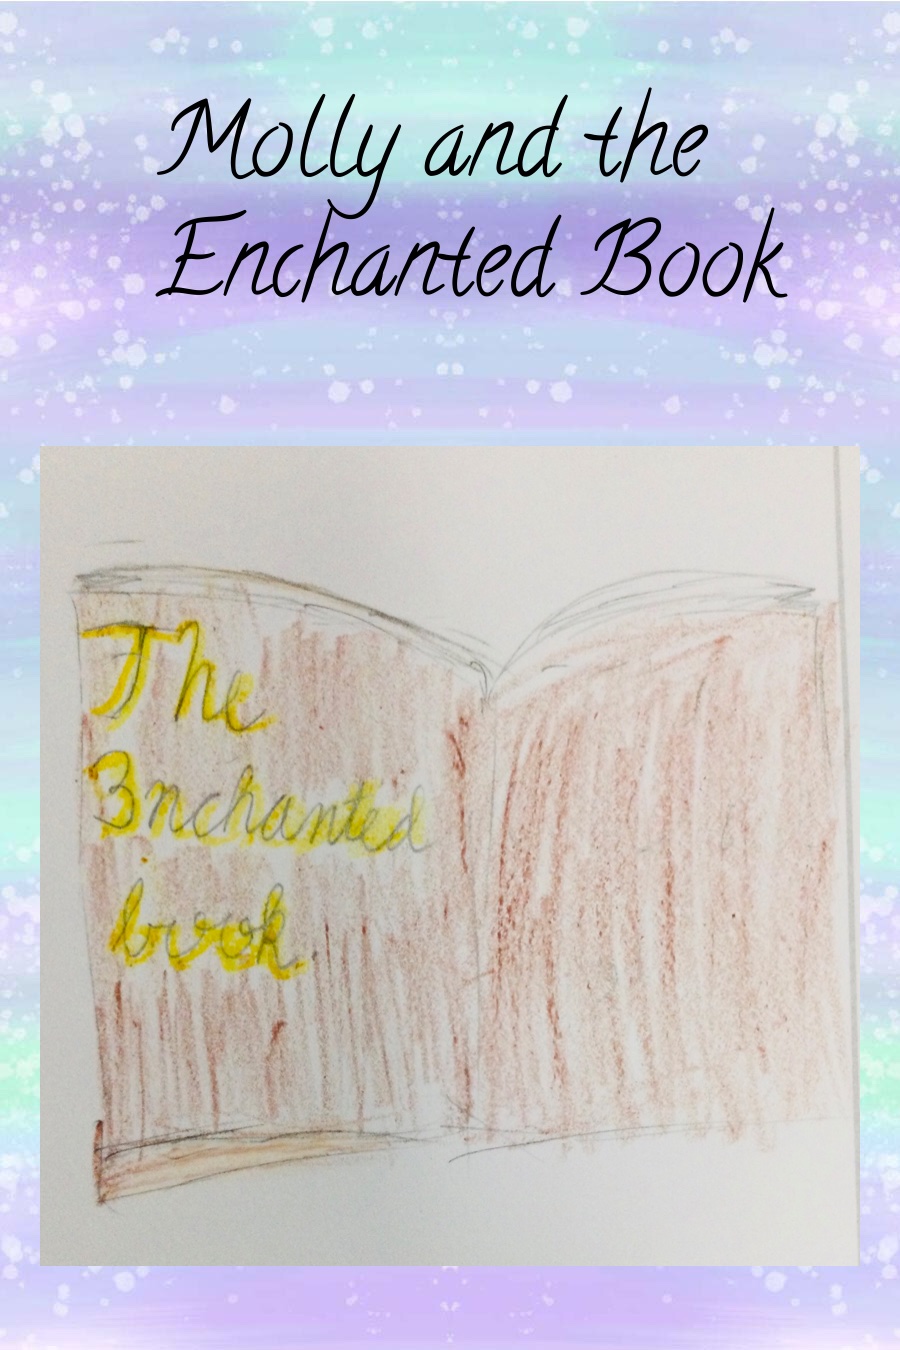 Molly and the Enchanted Book by Avanthika K